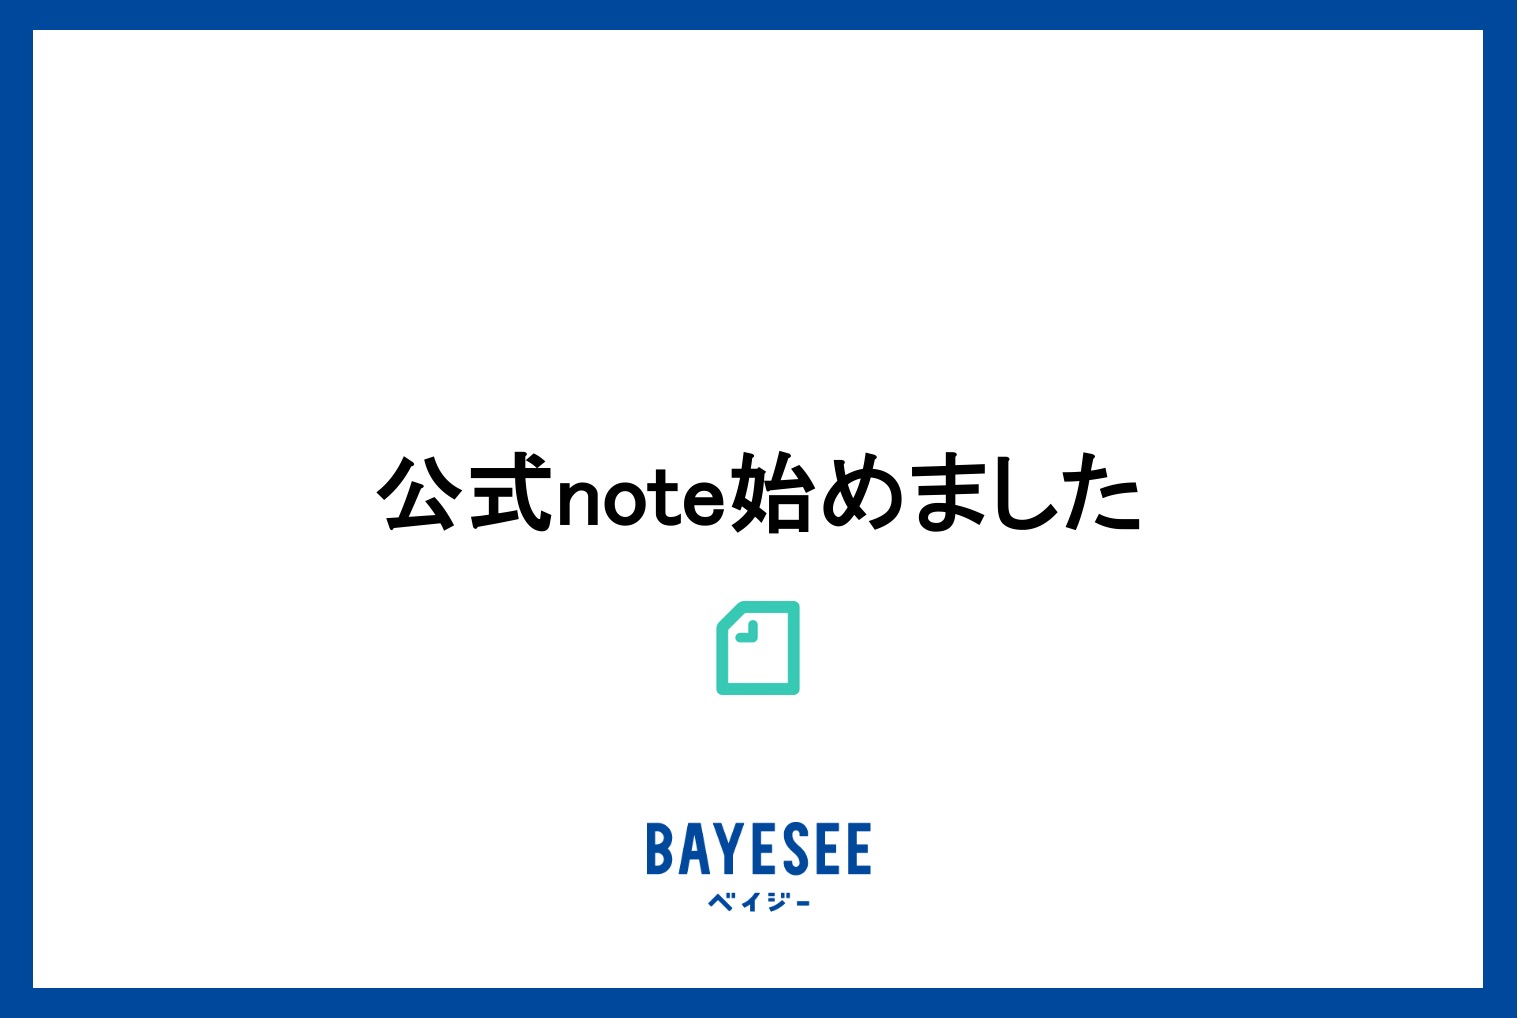 BAYESEE公式note